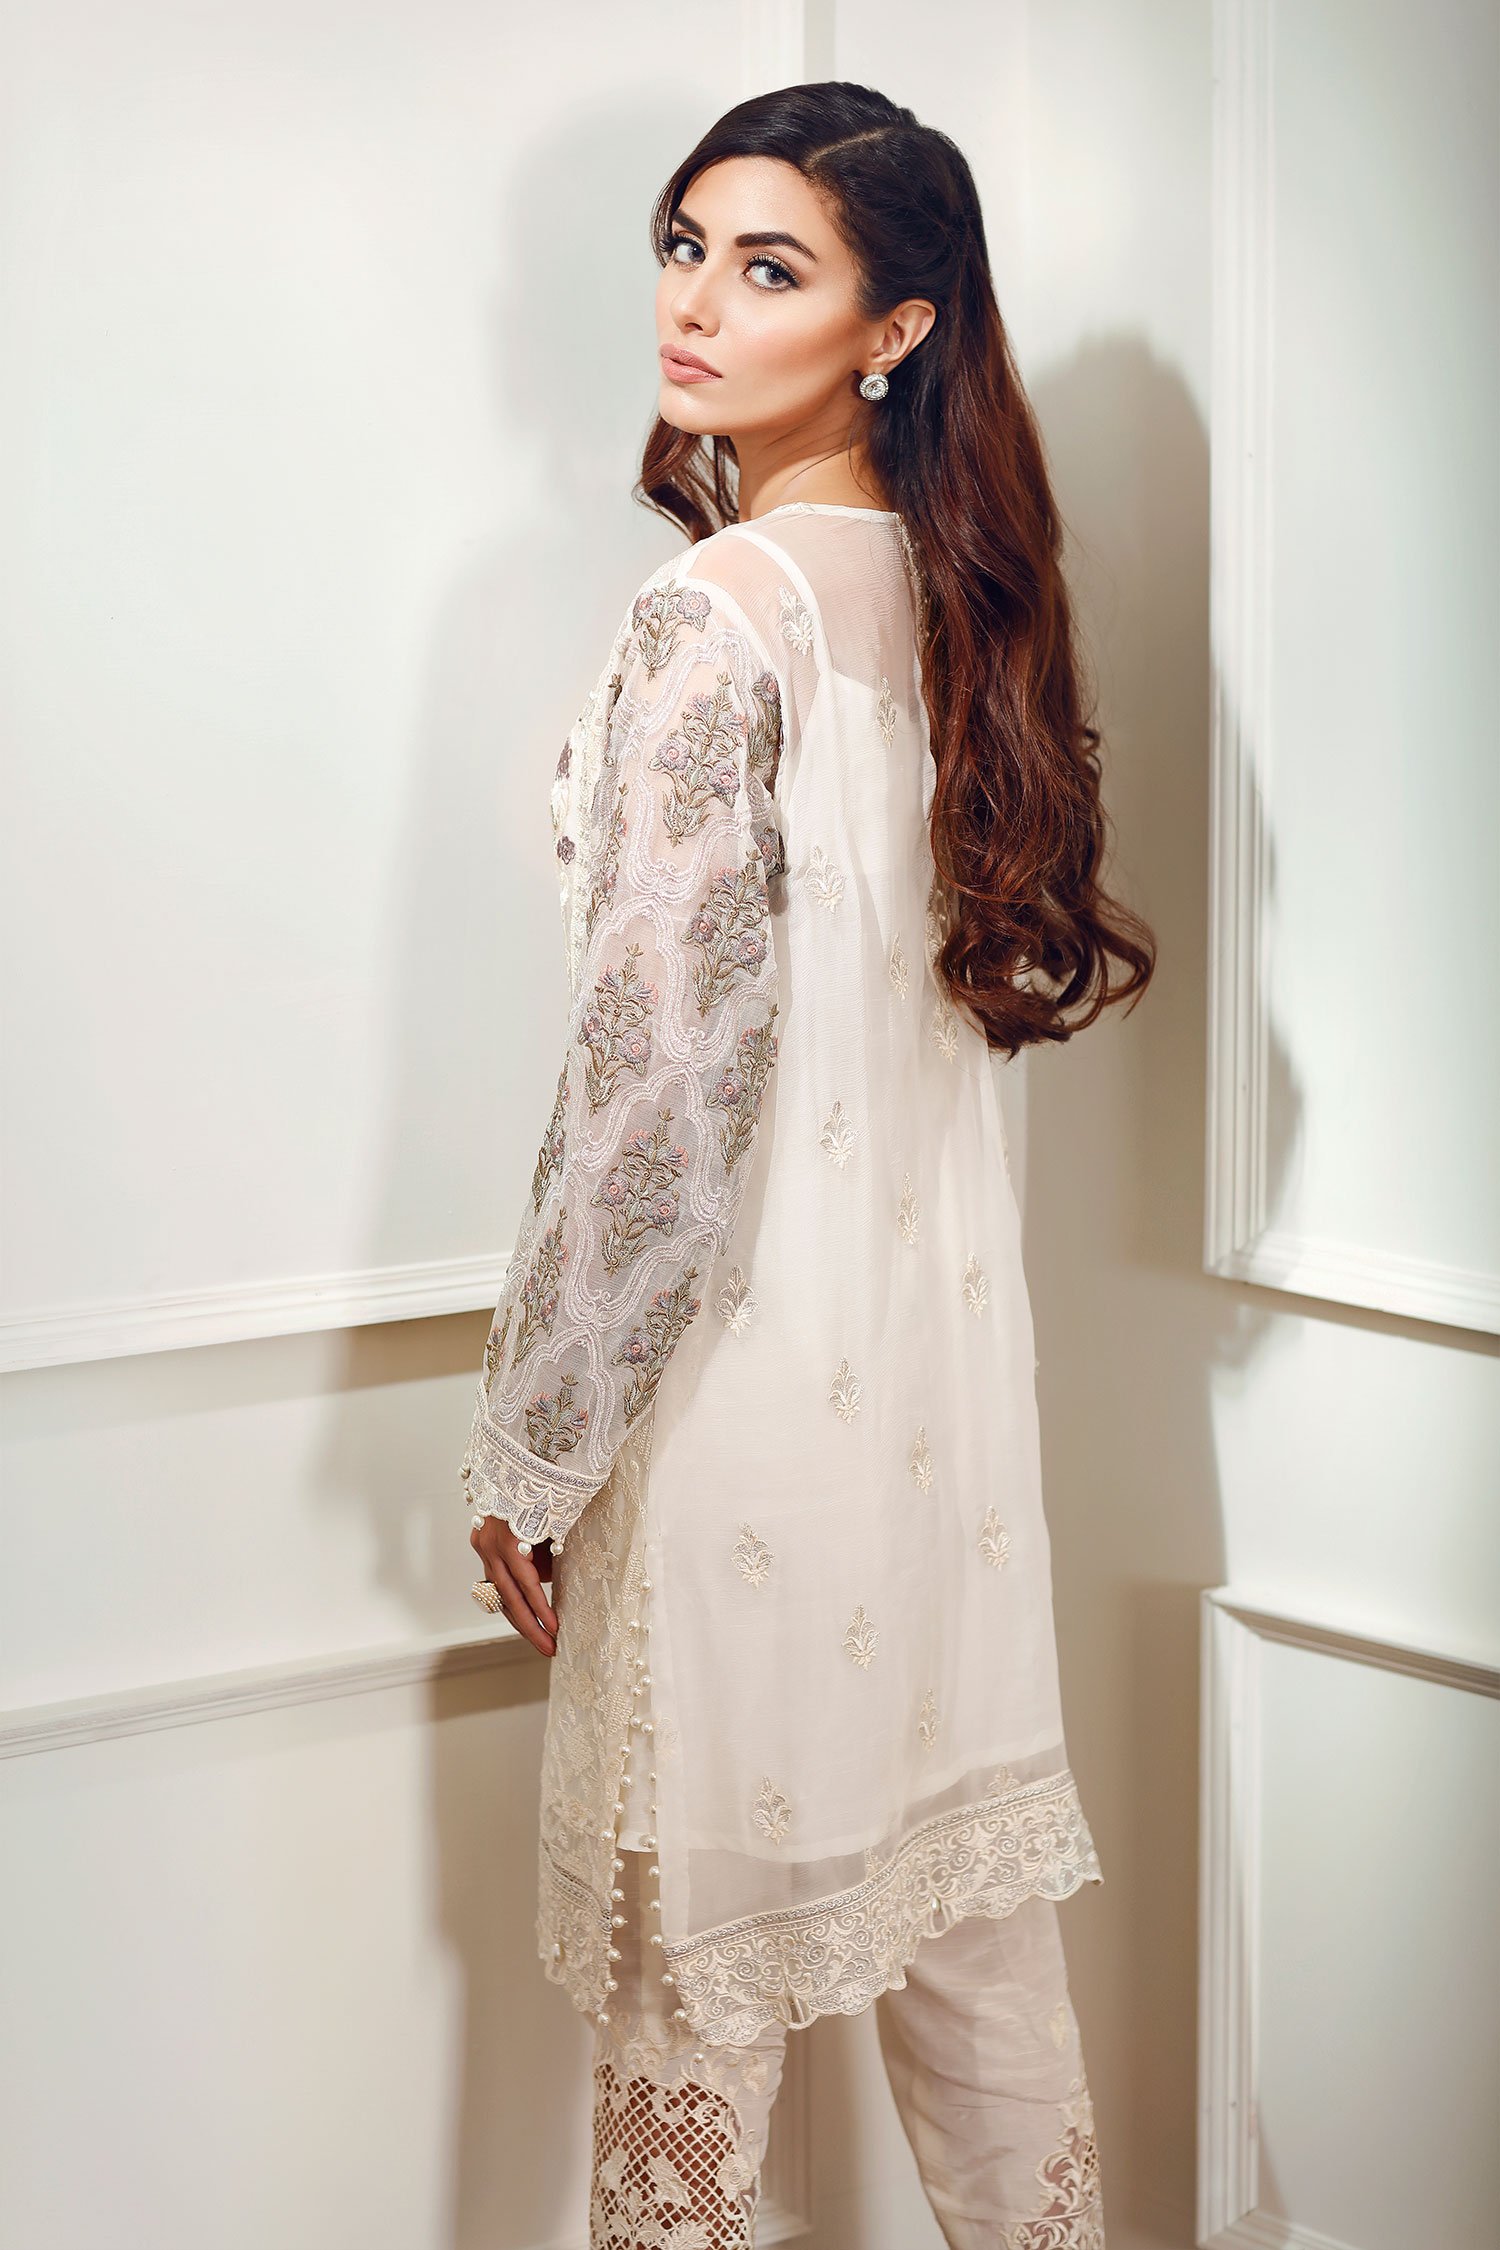 Buy this pretty embroidered stitched silk dress at a reasonable price available online by Suffuse by Baroque luxury prets 2018